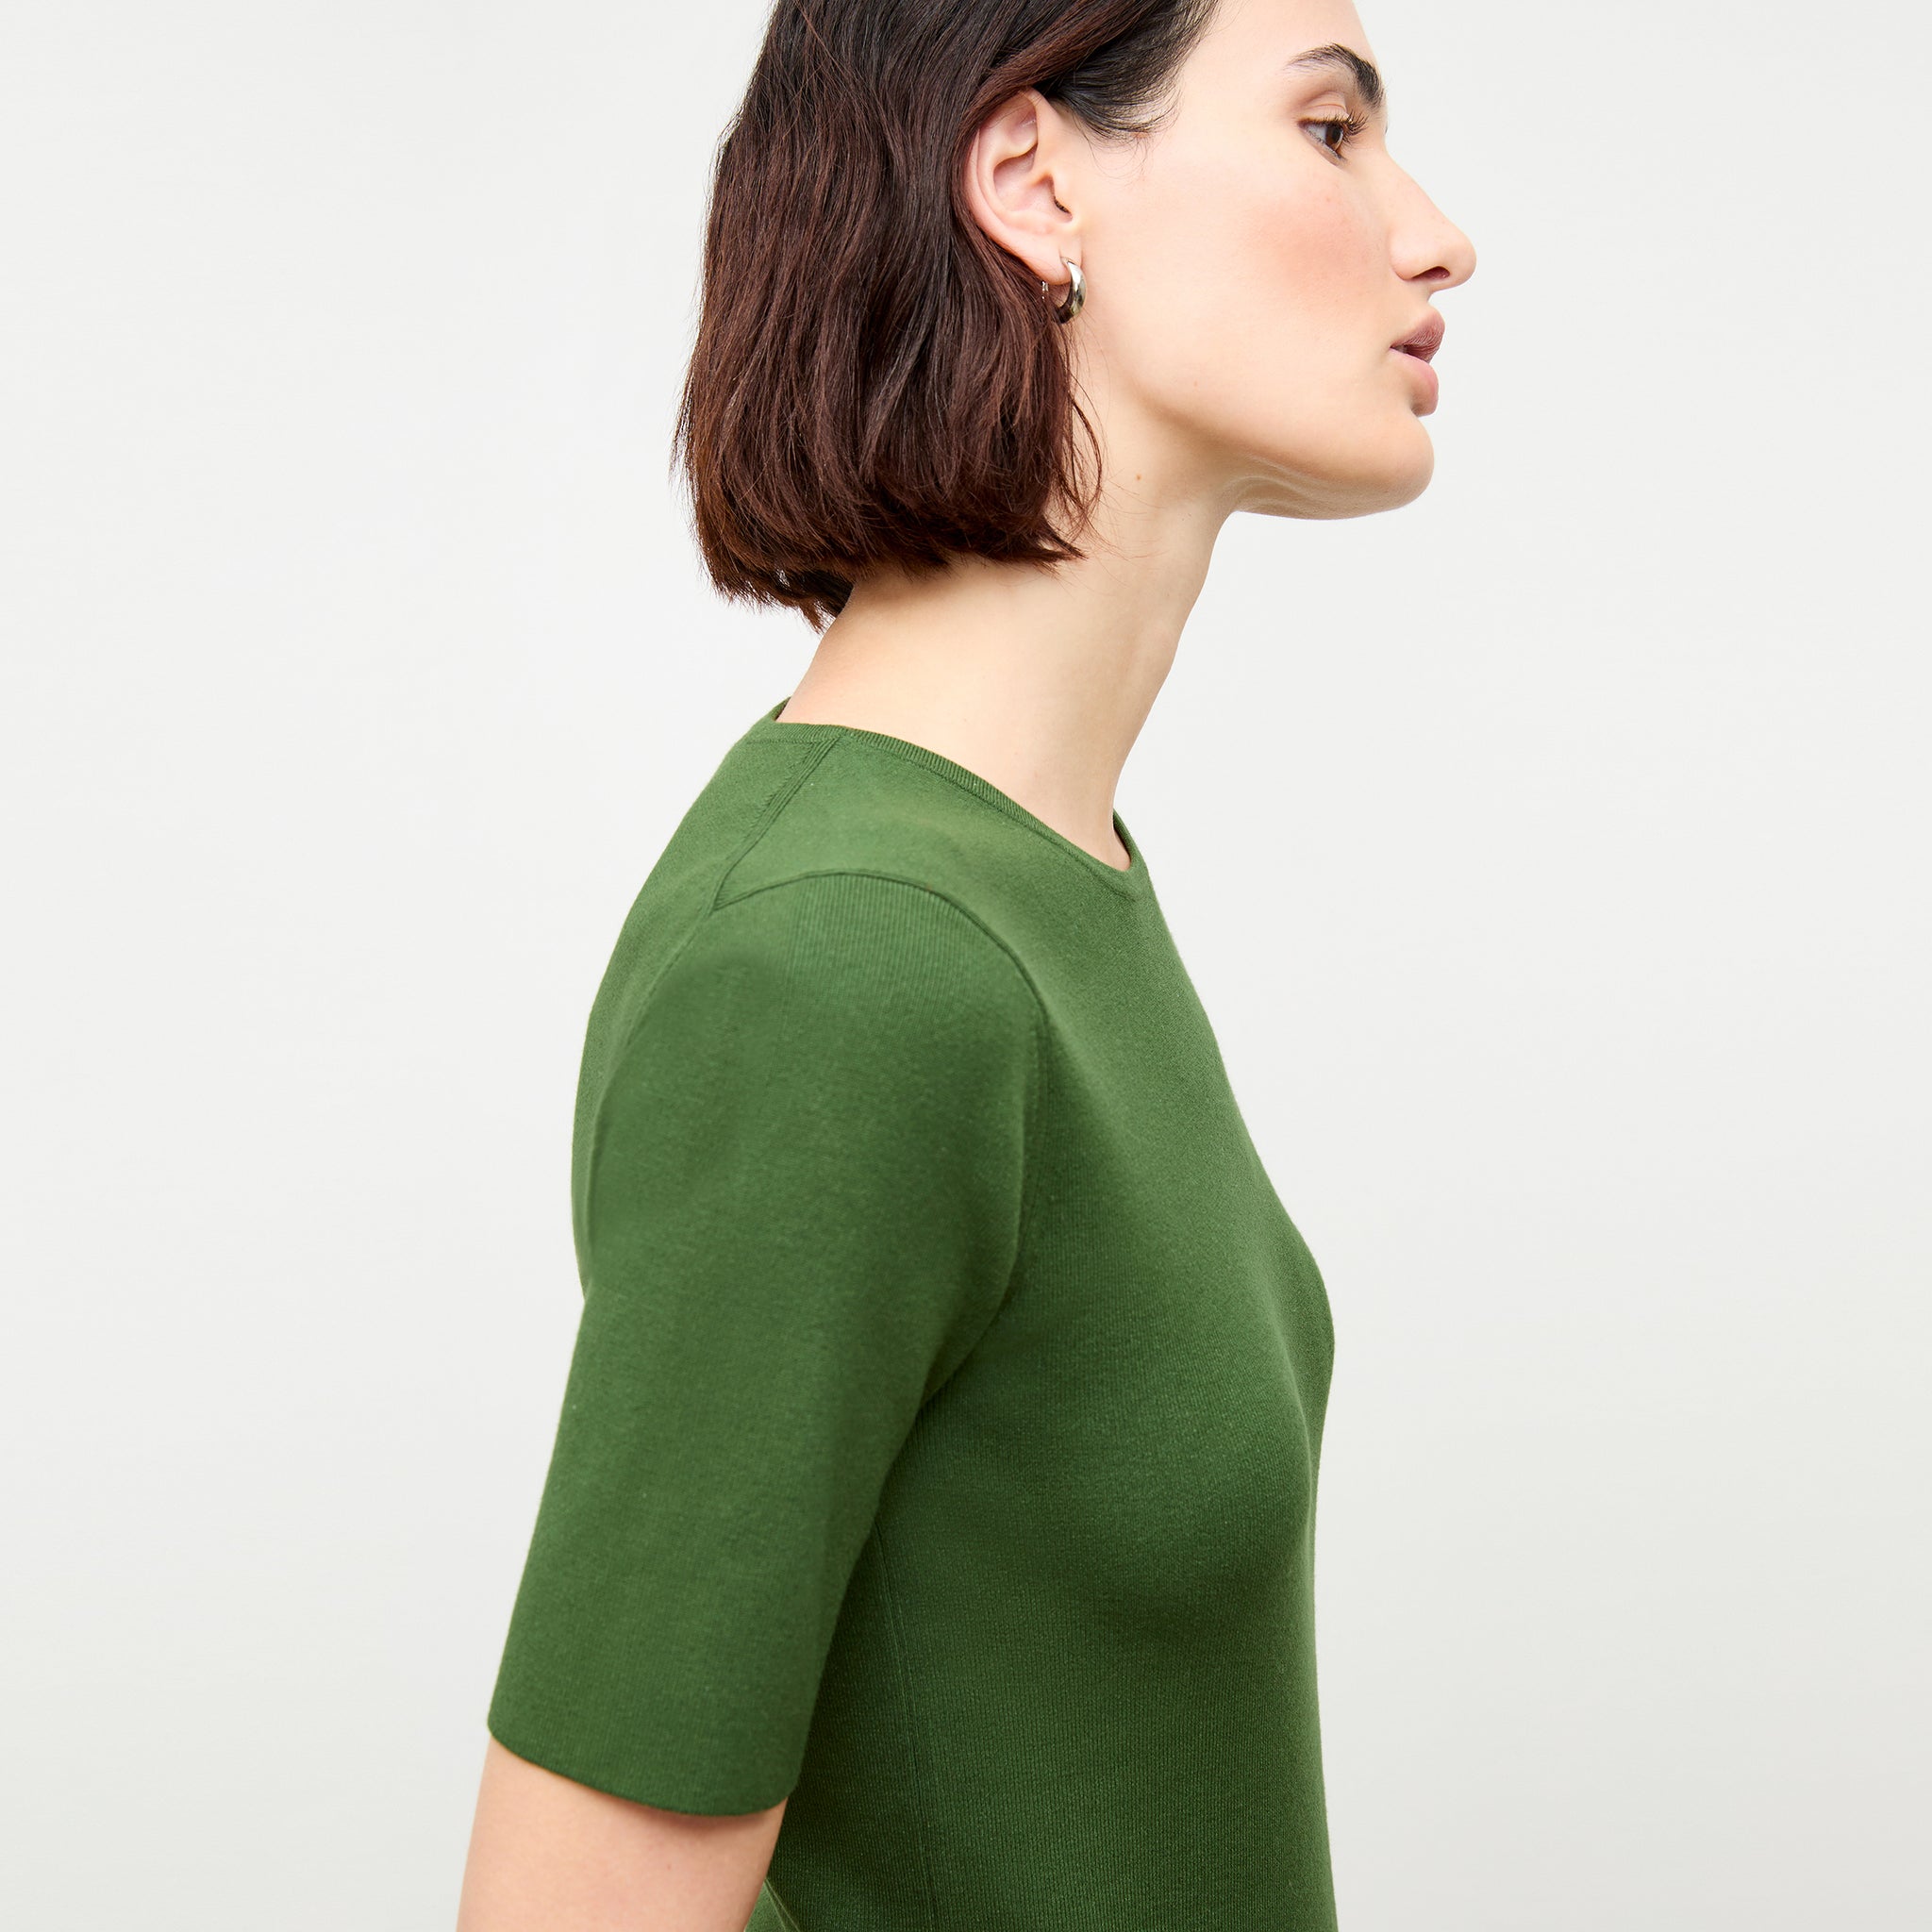 side image of a woman wearing the choe top in basil